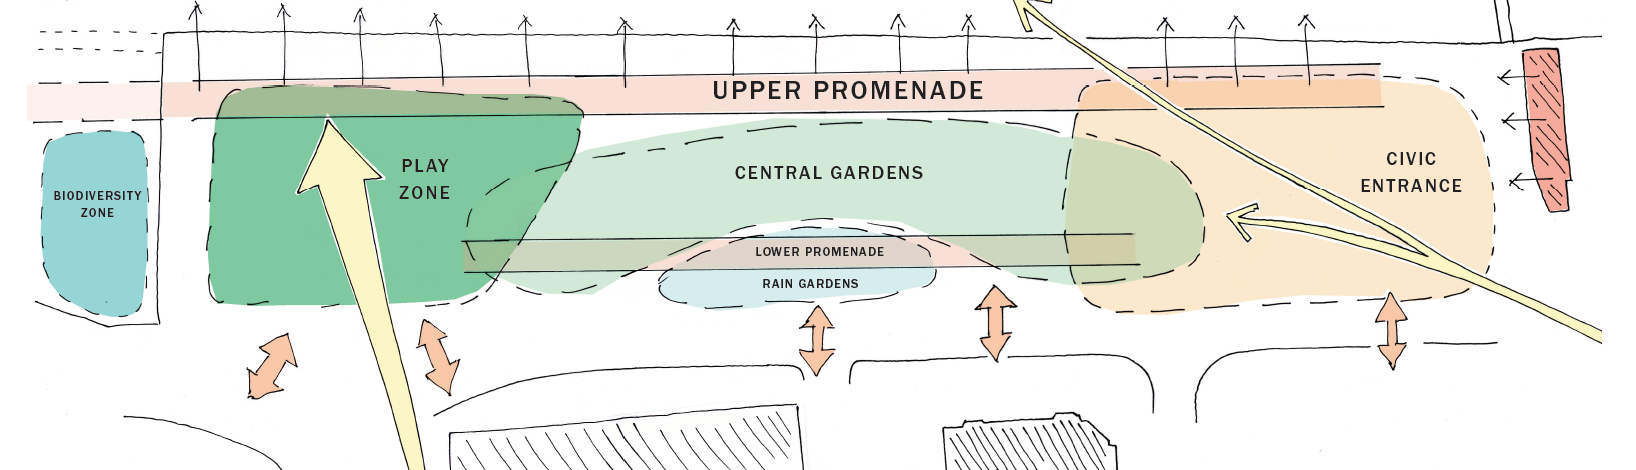 Sketch of the proposed layout of the Gardens with different areas markex